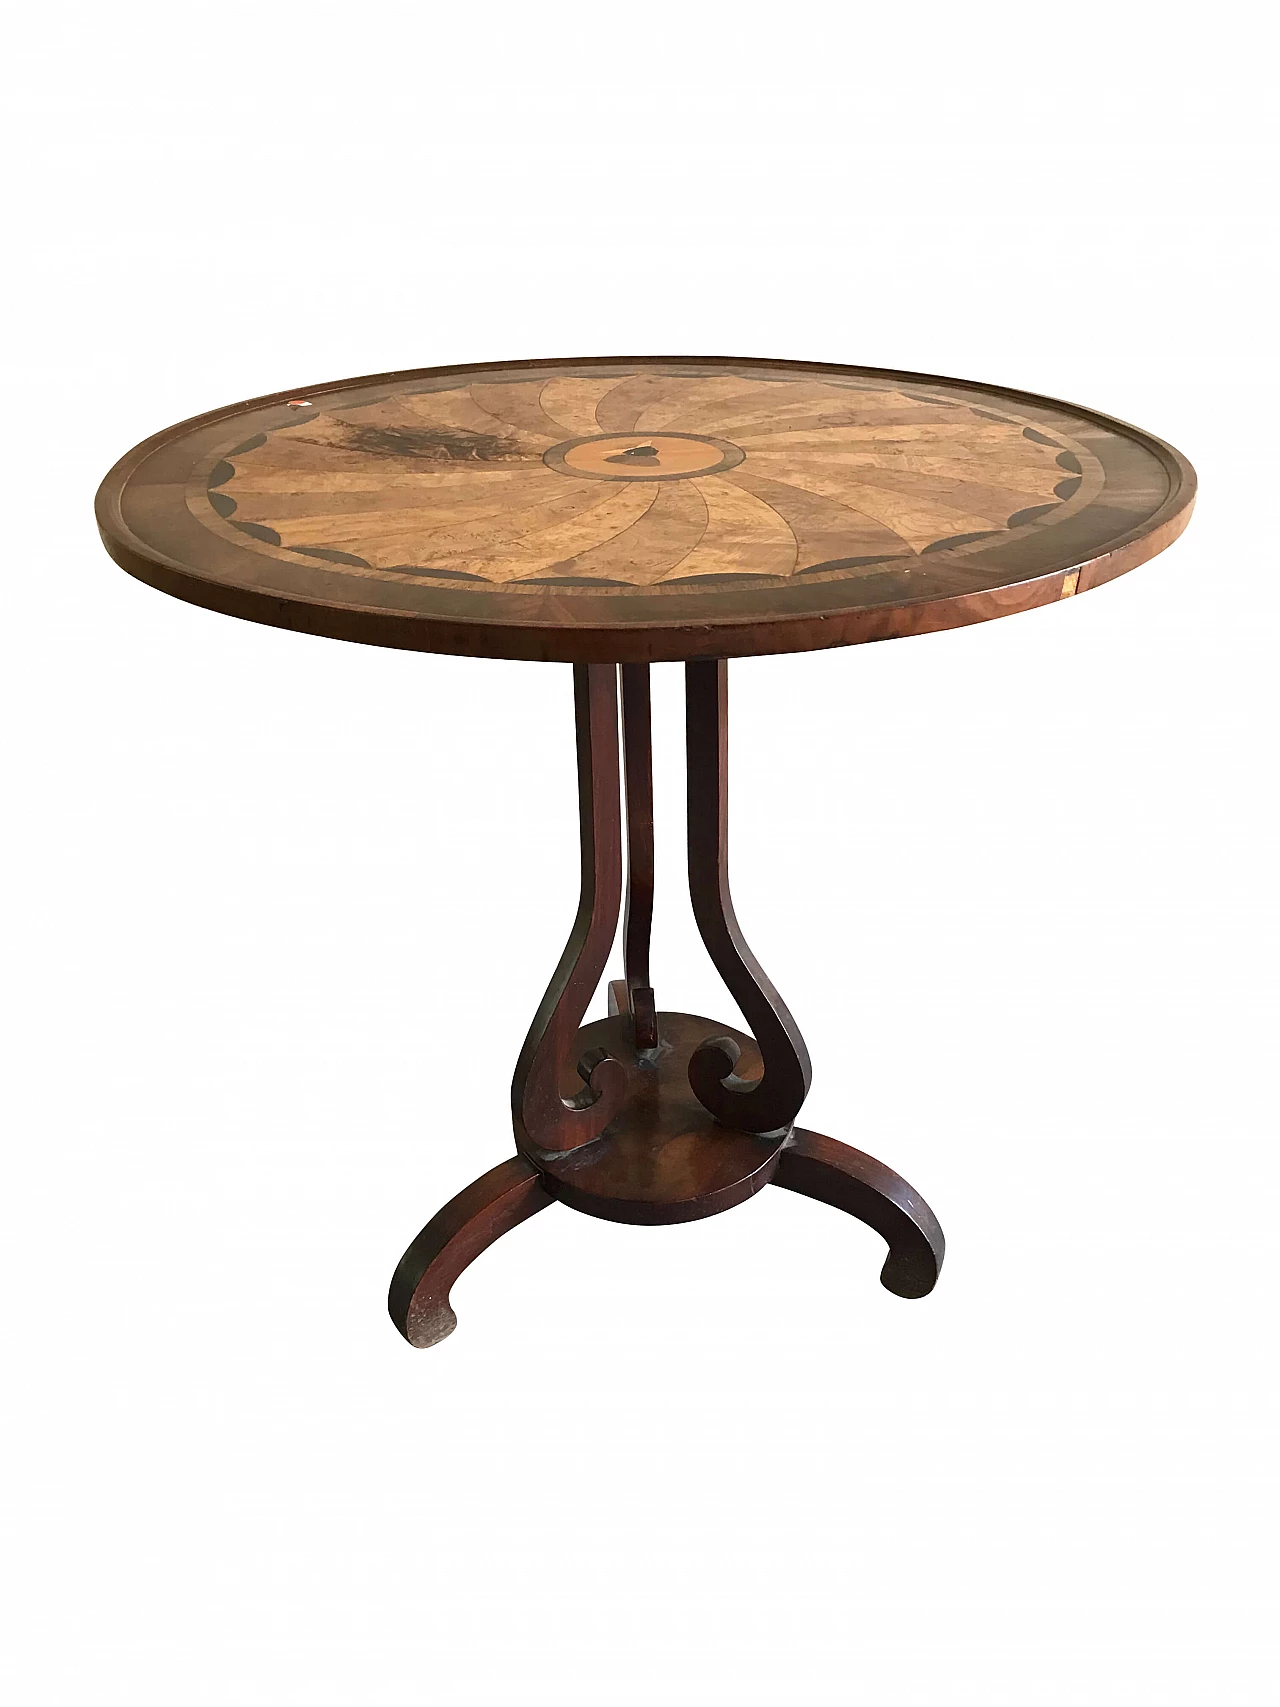 Mahogany travel table, with briarwood details, early 19th century 1068037